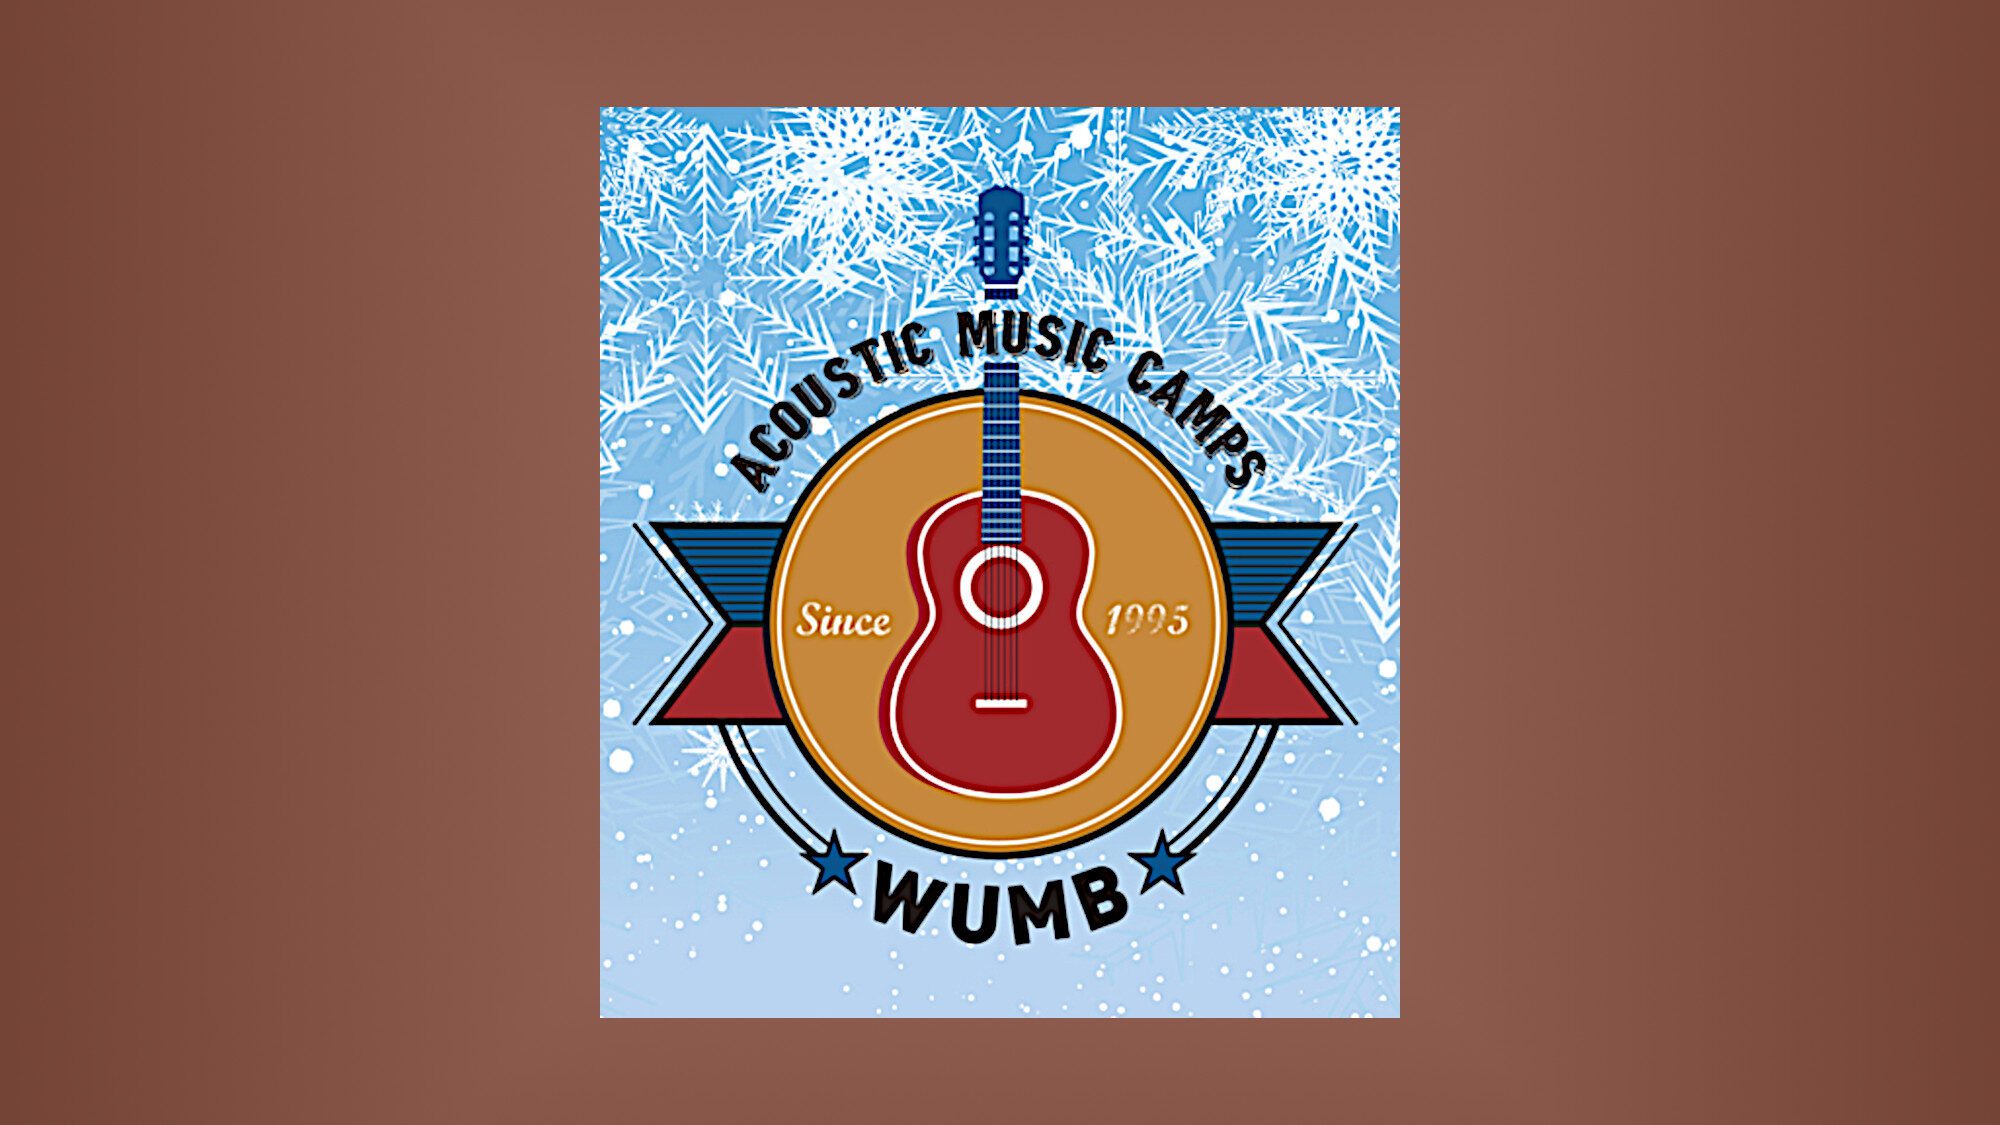 WUMB Acoustic Music Camps logo with a winter background